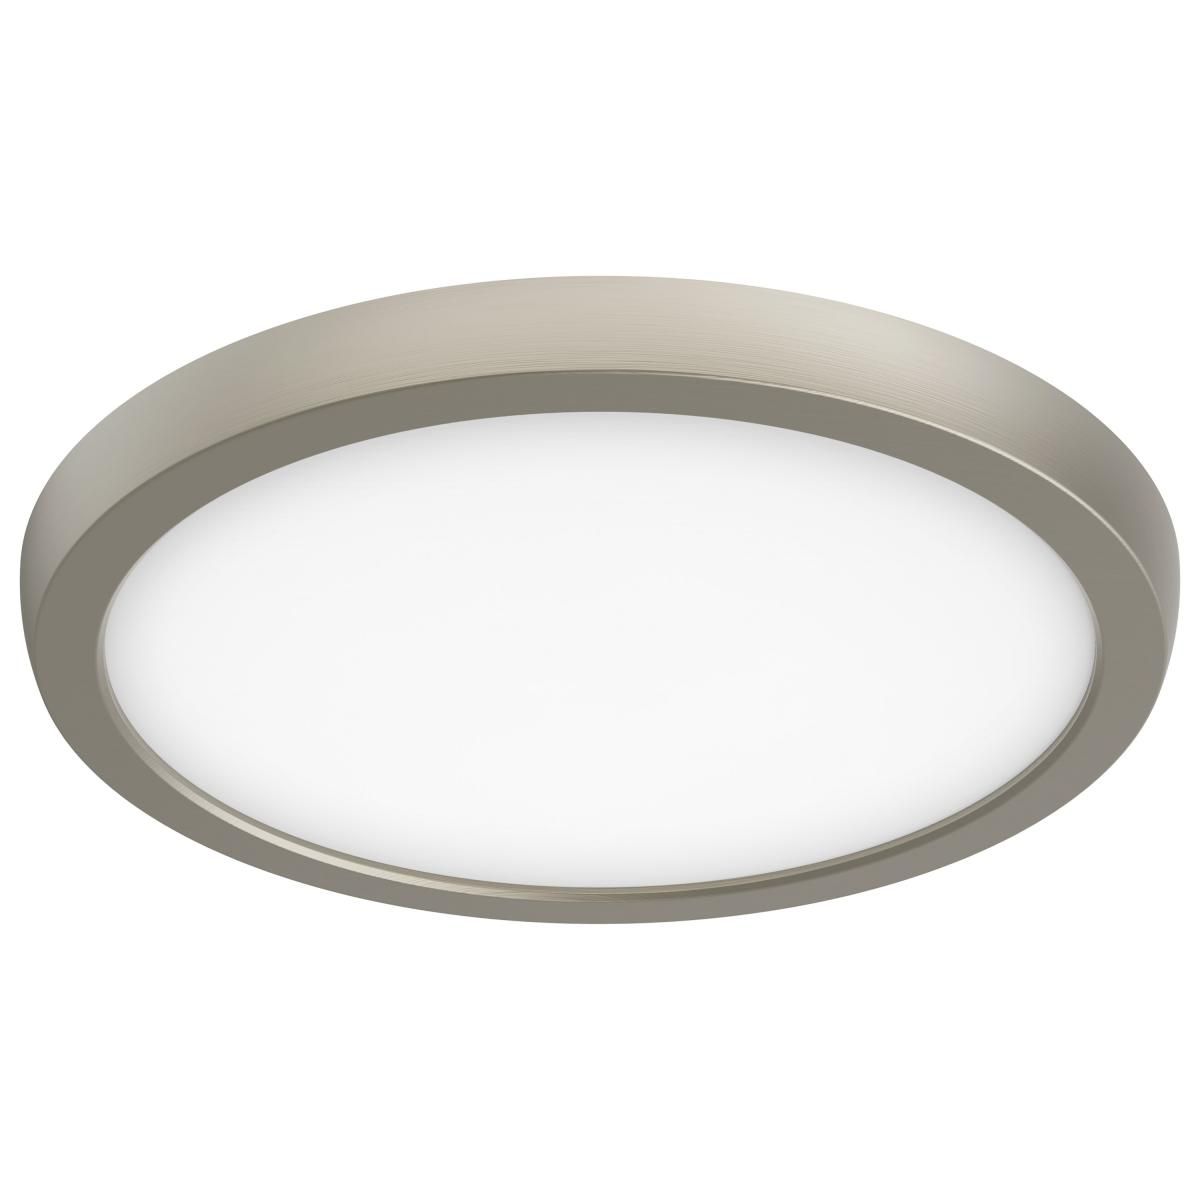 Blink 9 in. LED Round Disk Light 13W Selectable CCT